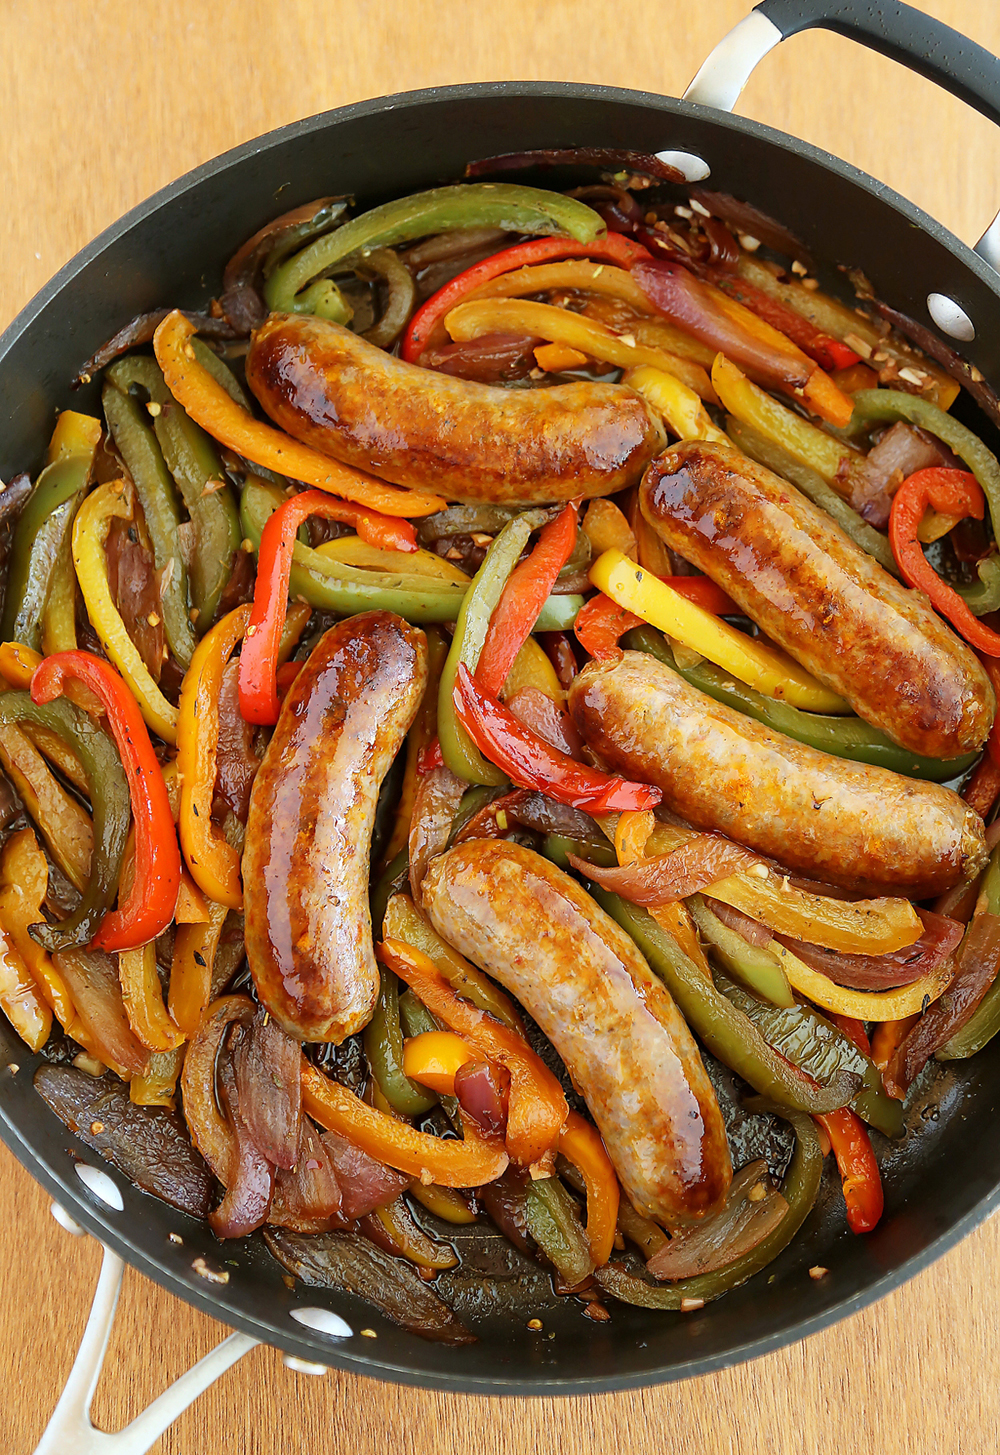 Sausage With Peppers and Onions Recipe - NYT Cooking